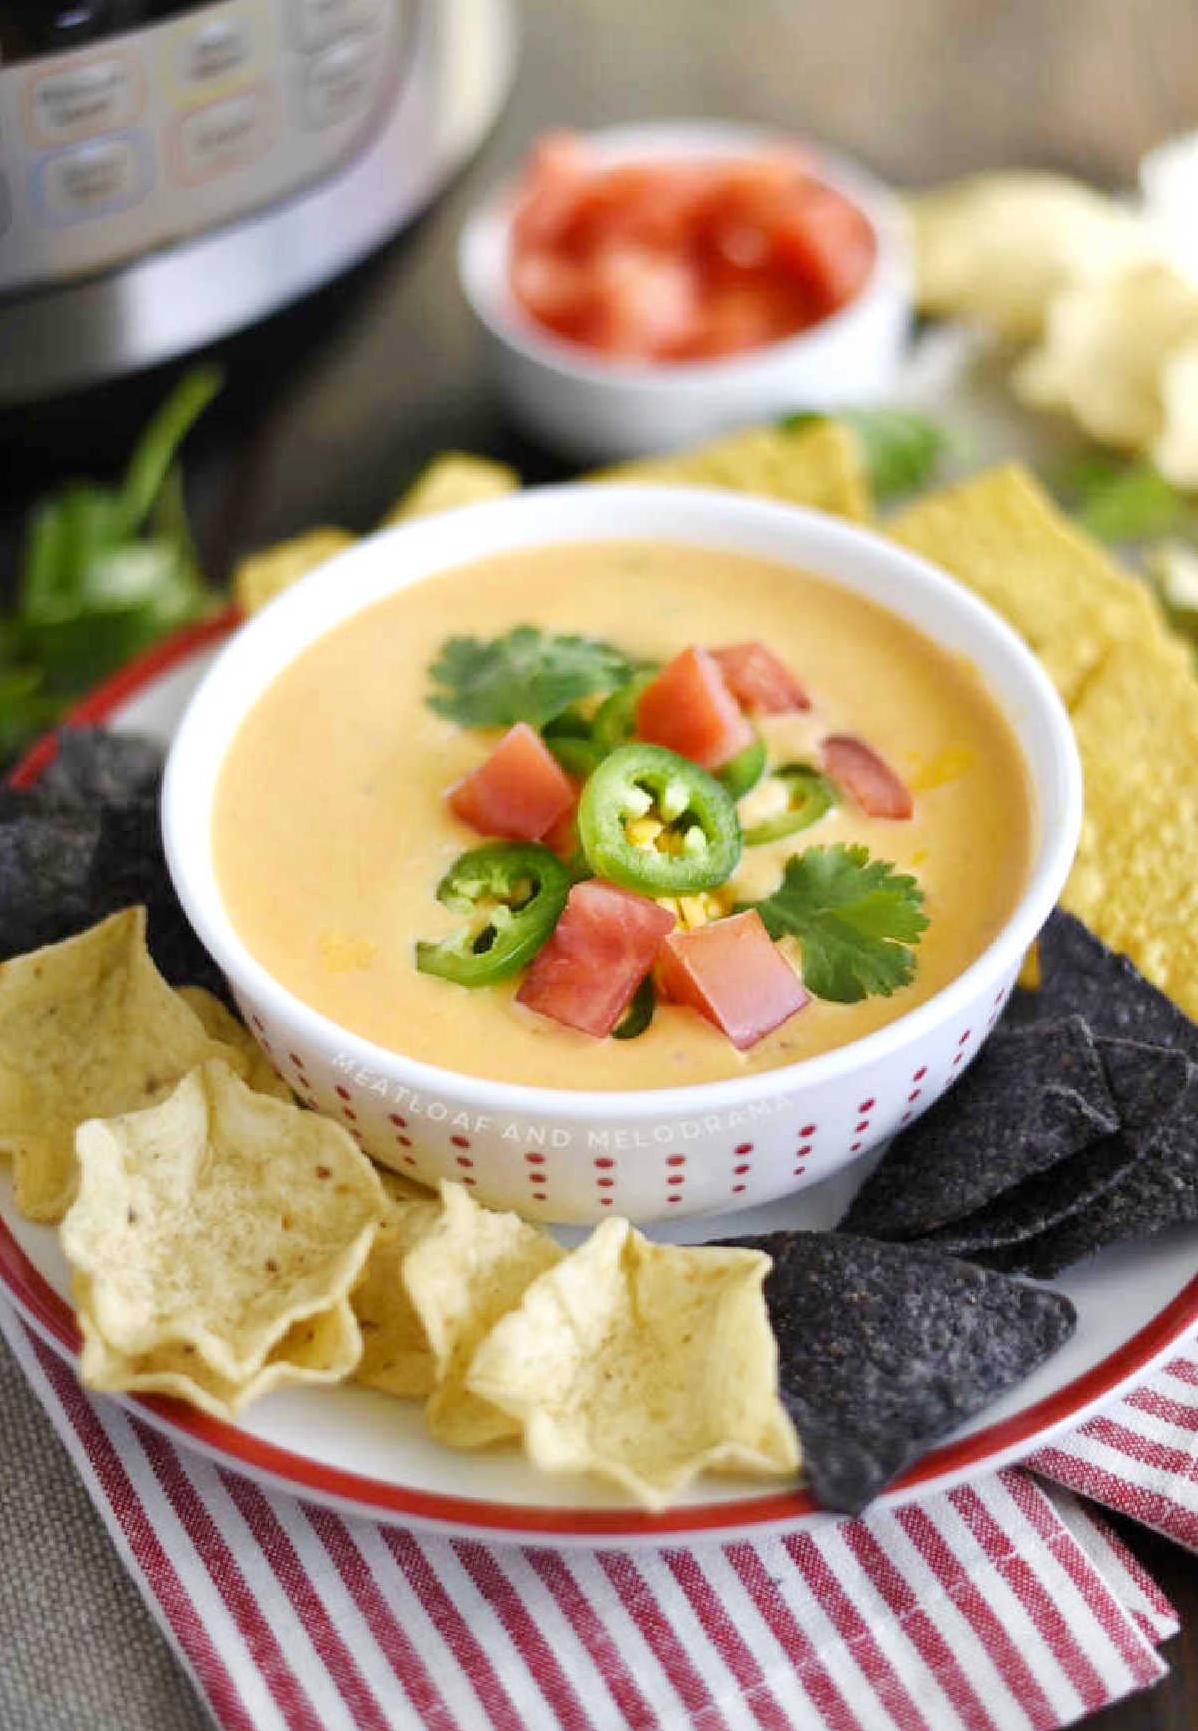  This dip is like a hug in a bowl - comforting and delicious.